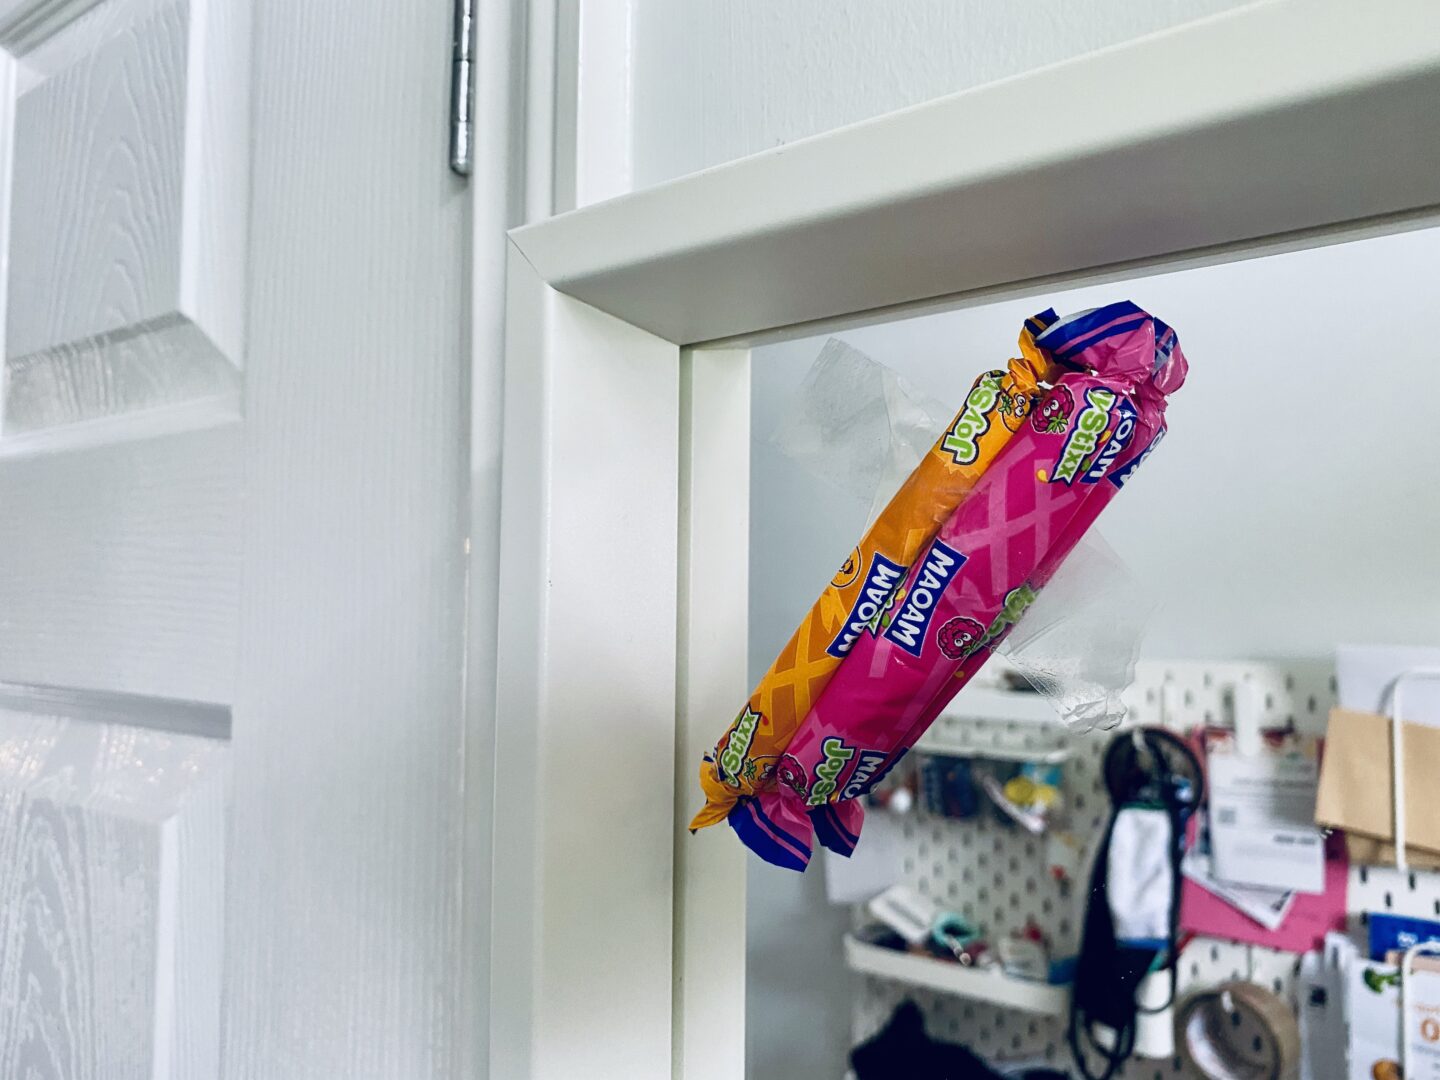 Some Maoam stuck to a mirror